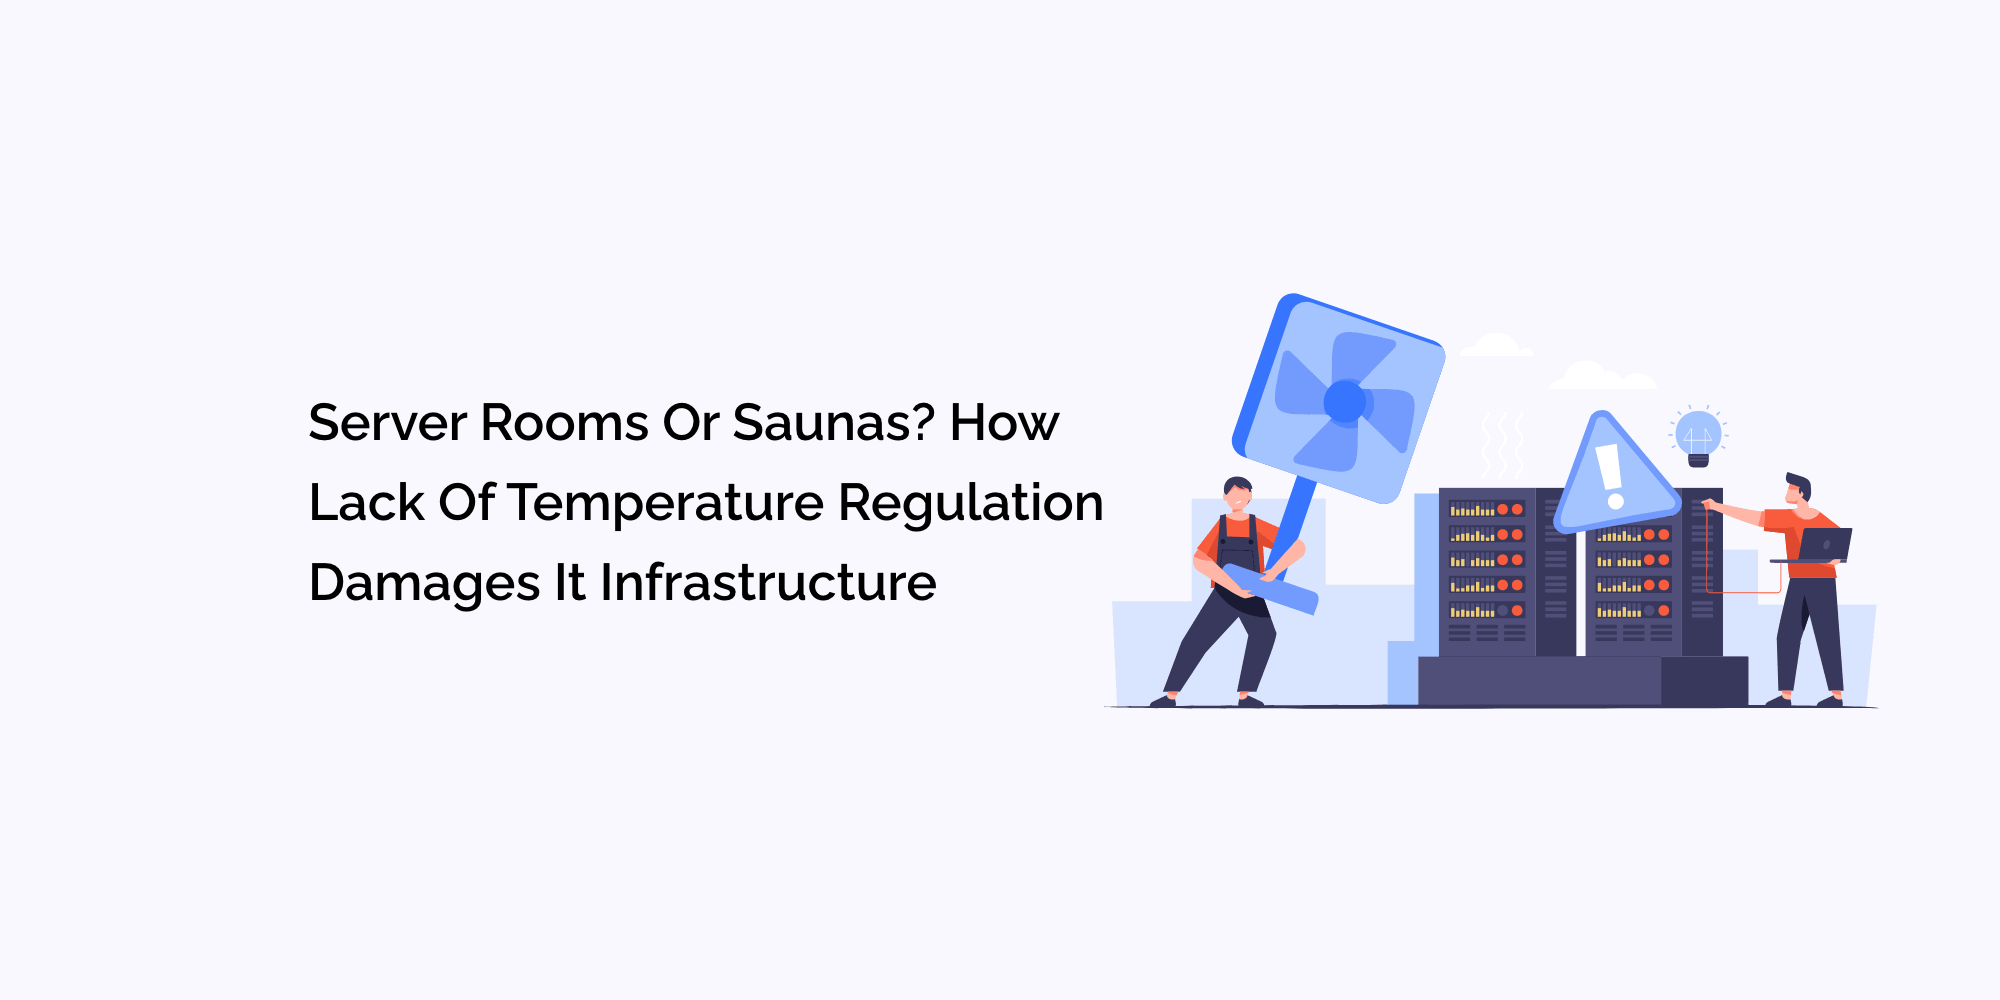 Server Rooms or Saunas? How Lack of Temperature Regulation Damages IT Infrastructure